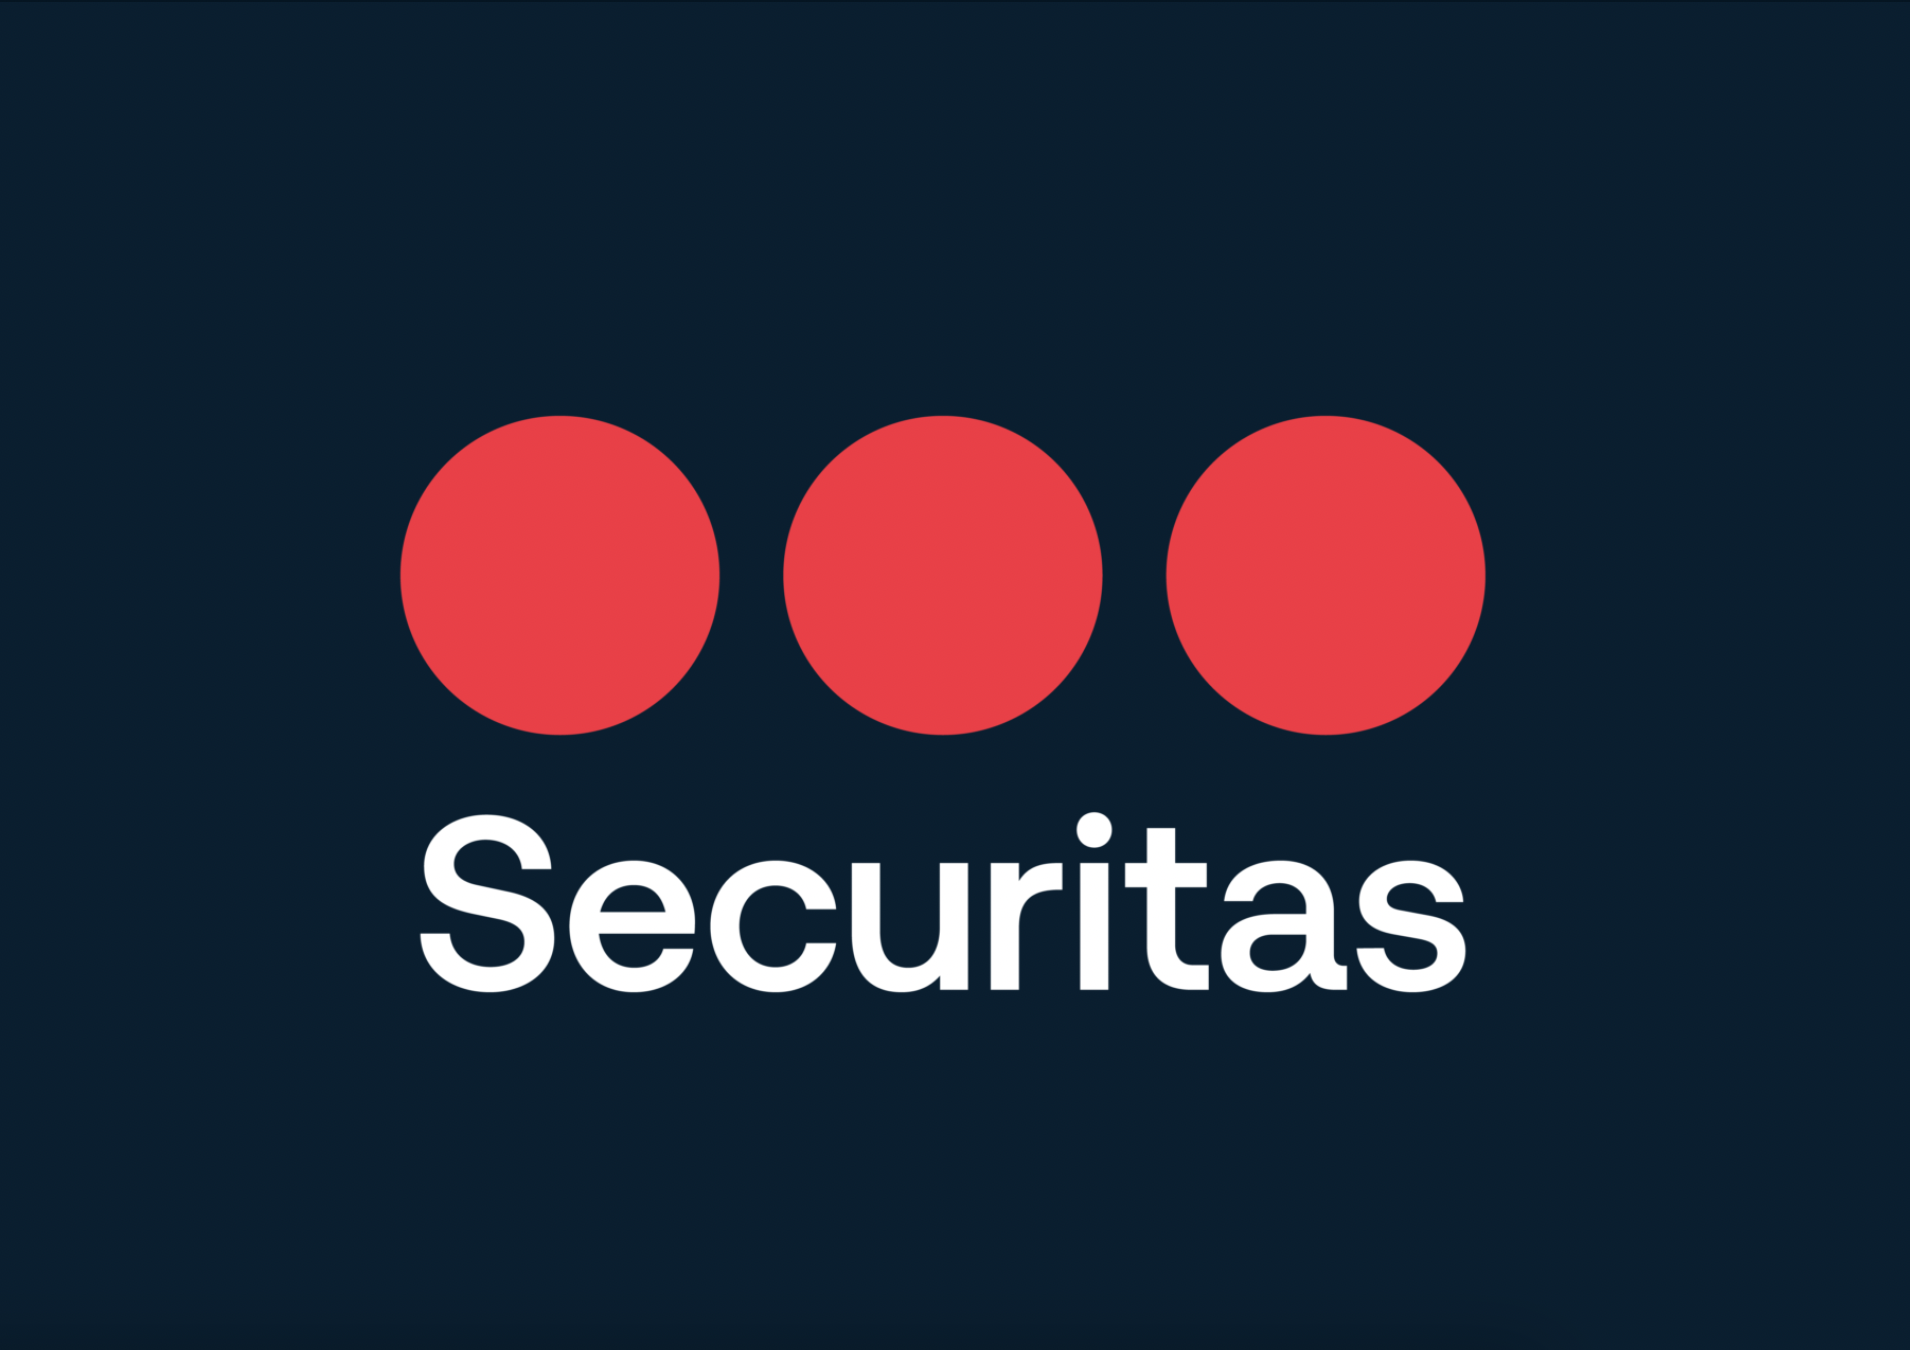 Securitas-logo. Token-based mobile access service is now available to Securitas’ customers as Securitas Opens, including Securitas branded mobile app and access control cloud service for the system administrators. The service has been launched in Finland and will be implemented globally.